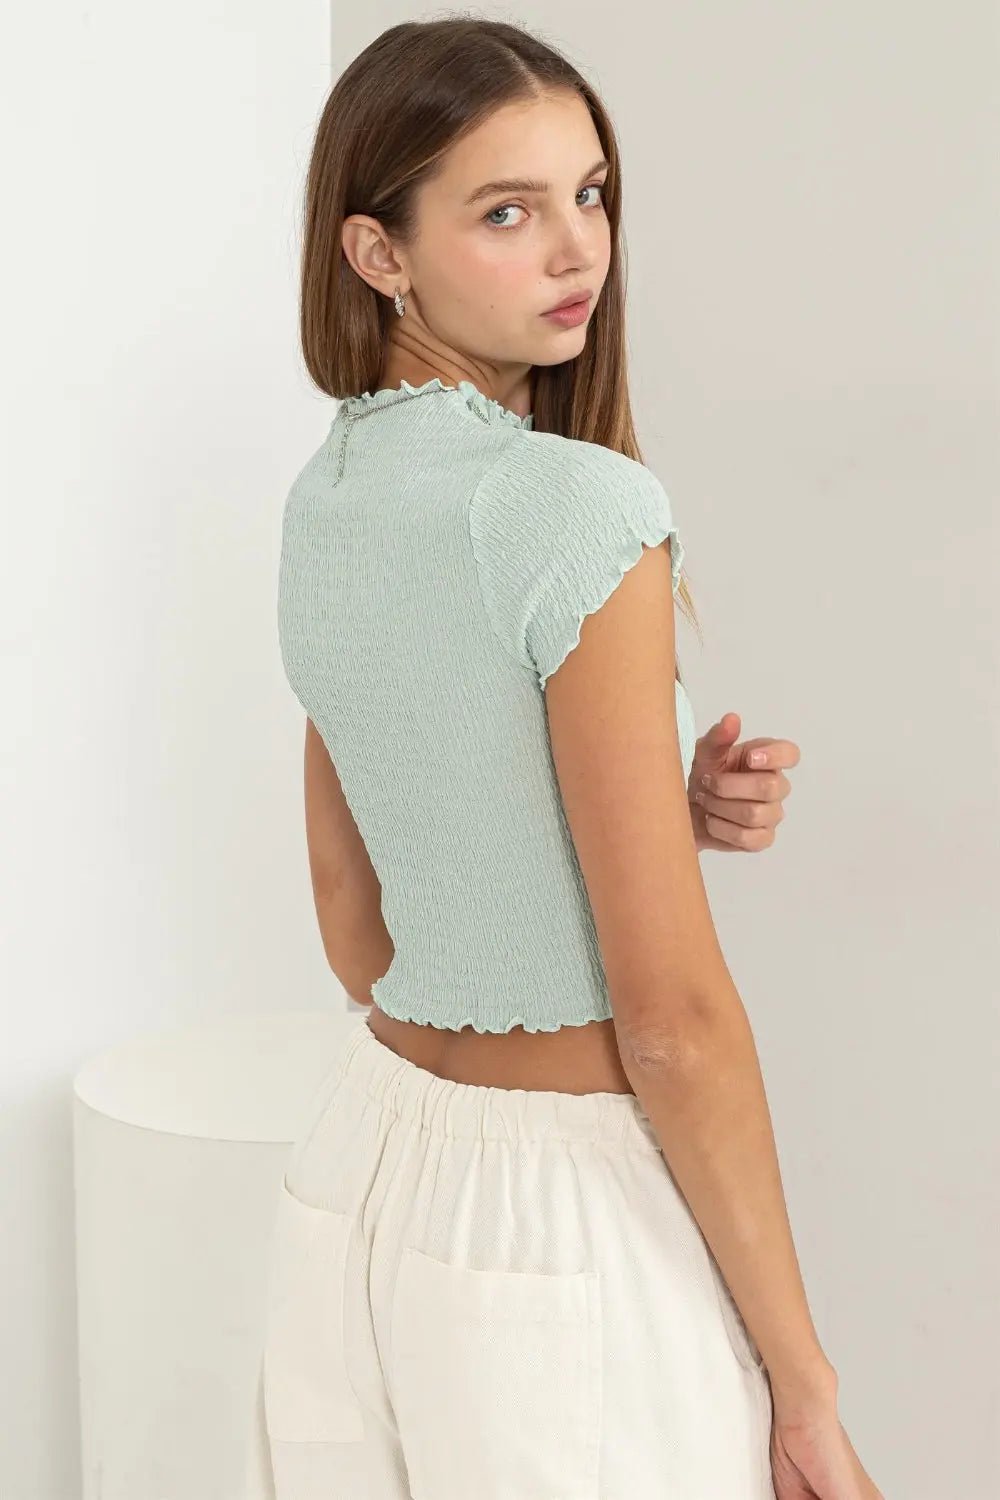 CASUAL SHORT SLEEVE CROPPED LETTUCE EDGE TOP - MeadeuxCASUAL SHORT SLEEVE CROPPED LETTUCE EDGE TOPCrop TopMeadeux